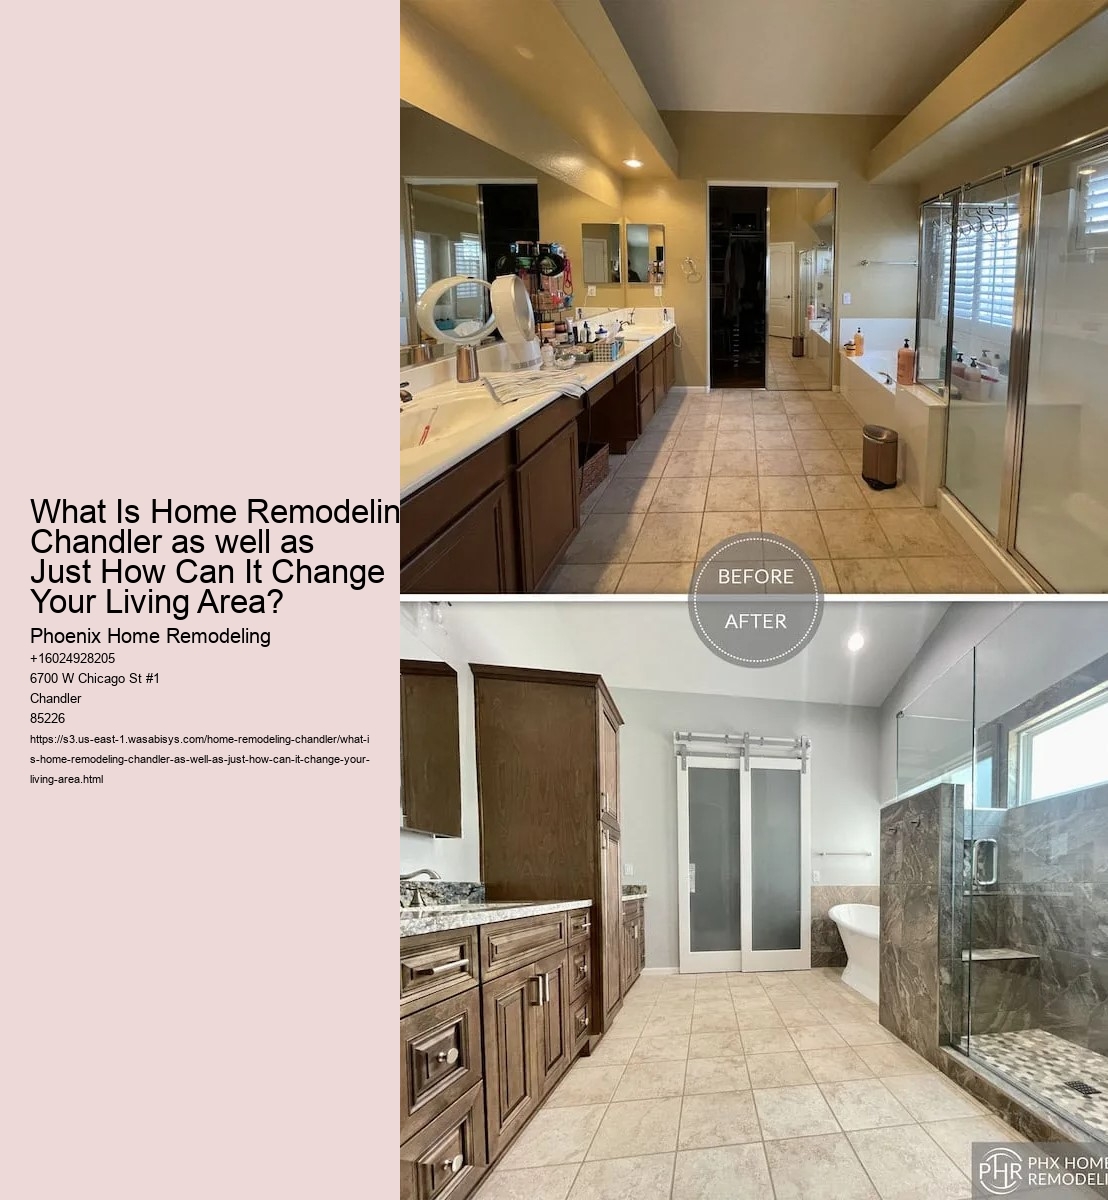 What Is Home Remodeling Chandler as well as Just How Can It Change Your Living Area?